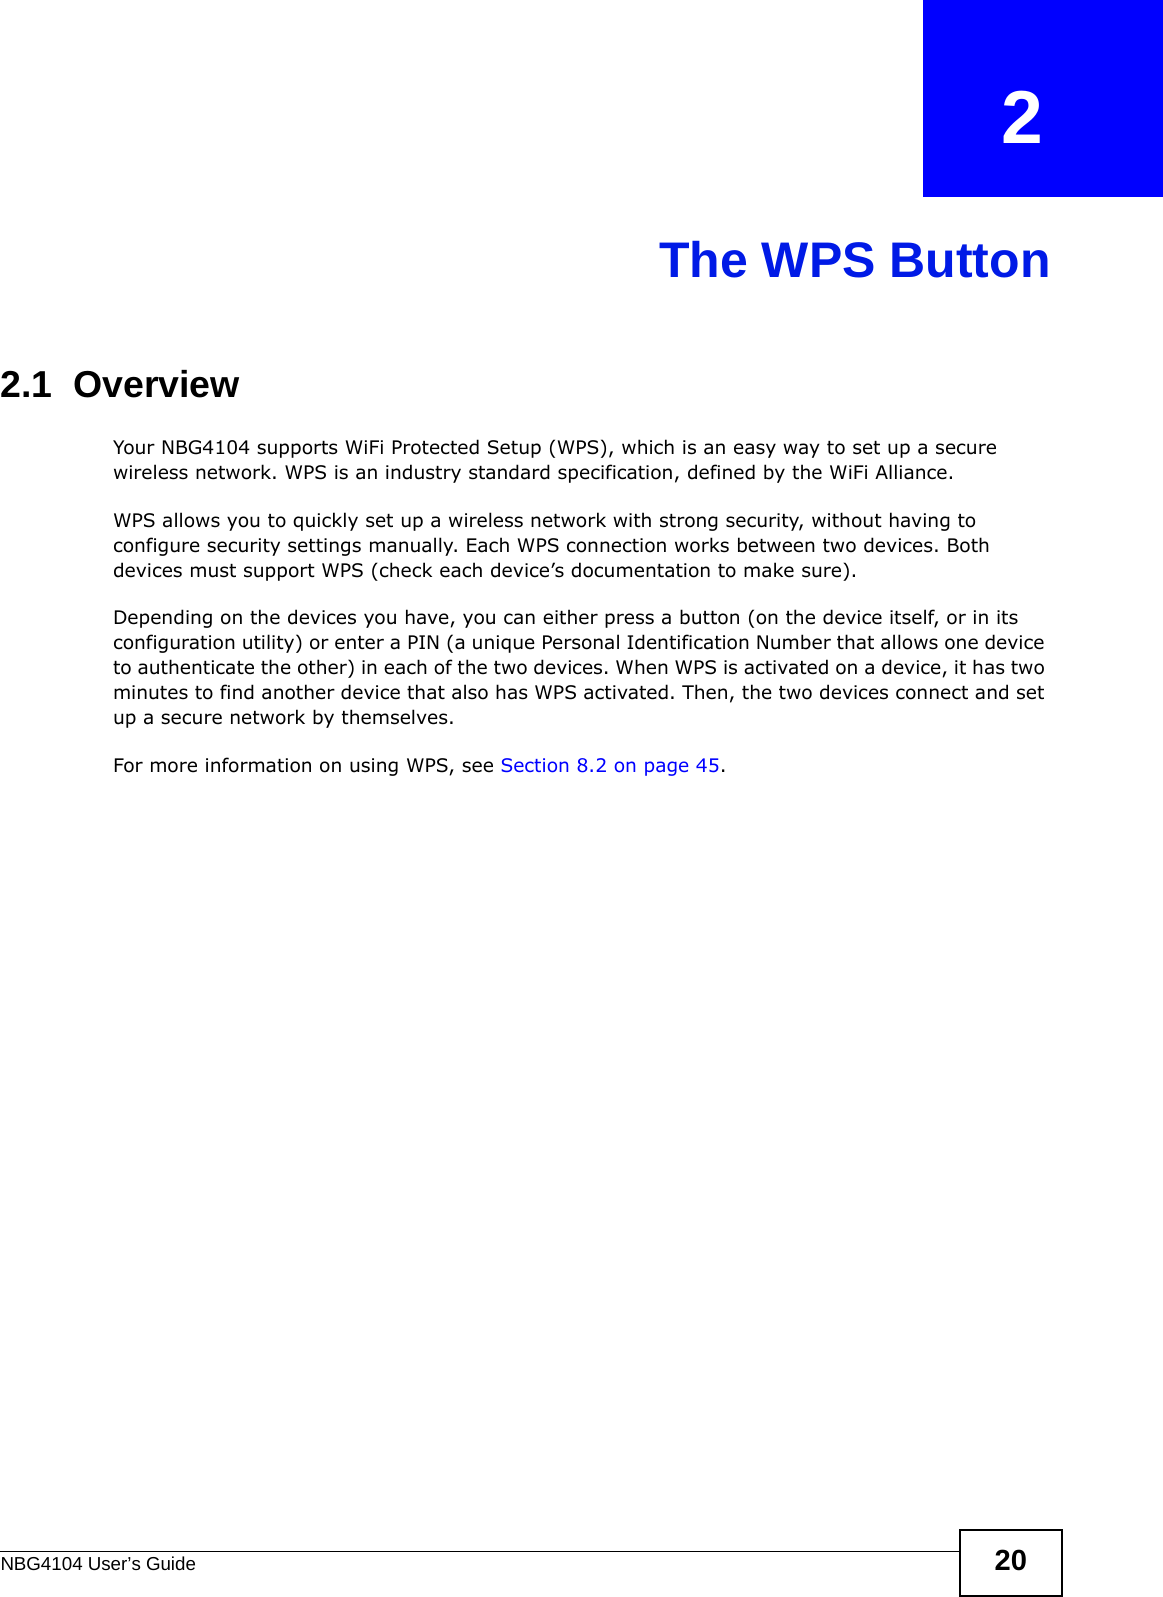 NBG4104 User’s Guide 20CHAPTER   2The WPS Button2.1  OverviewYour NBG4104 supports WiFi Protected Setup (WPS), which is an easy way to set up a secure wireless network. WPS is an industry standard specification, defined by the WiFi Alliance.WPS allows you to quickly set up a wireless network with strong security, without having to configure security settings manually. Each WPS connection works between two devices. Both devices must support WPS (check each device’s documentation to make sure). Depending on the devices you have, you can either press a button (on the device itself, or in its configuration utility) or enter a PIN (a unique Personal Identification Number that allows one device to authenticate the other) in each of the two devices. When WPS is activated on a device, it has two minutes to find another device that also has WPS activated. Then, the two devices connect and set up a secure network by themselves.For more information on using WPS, see Section 8.2 on page 45.